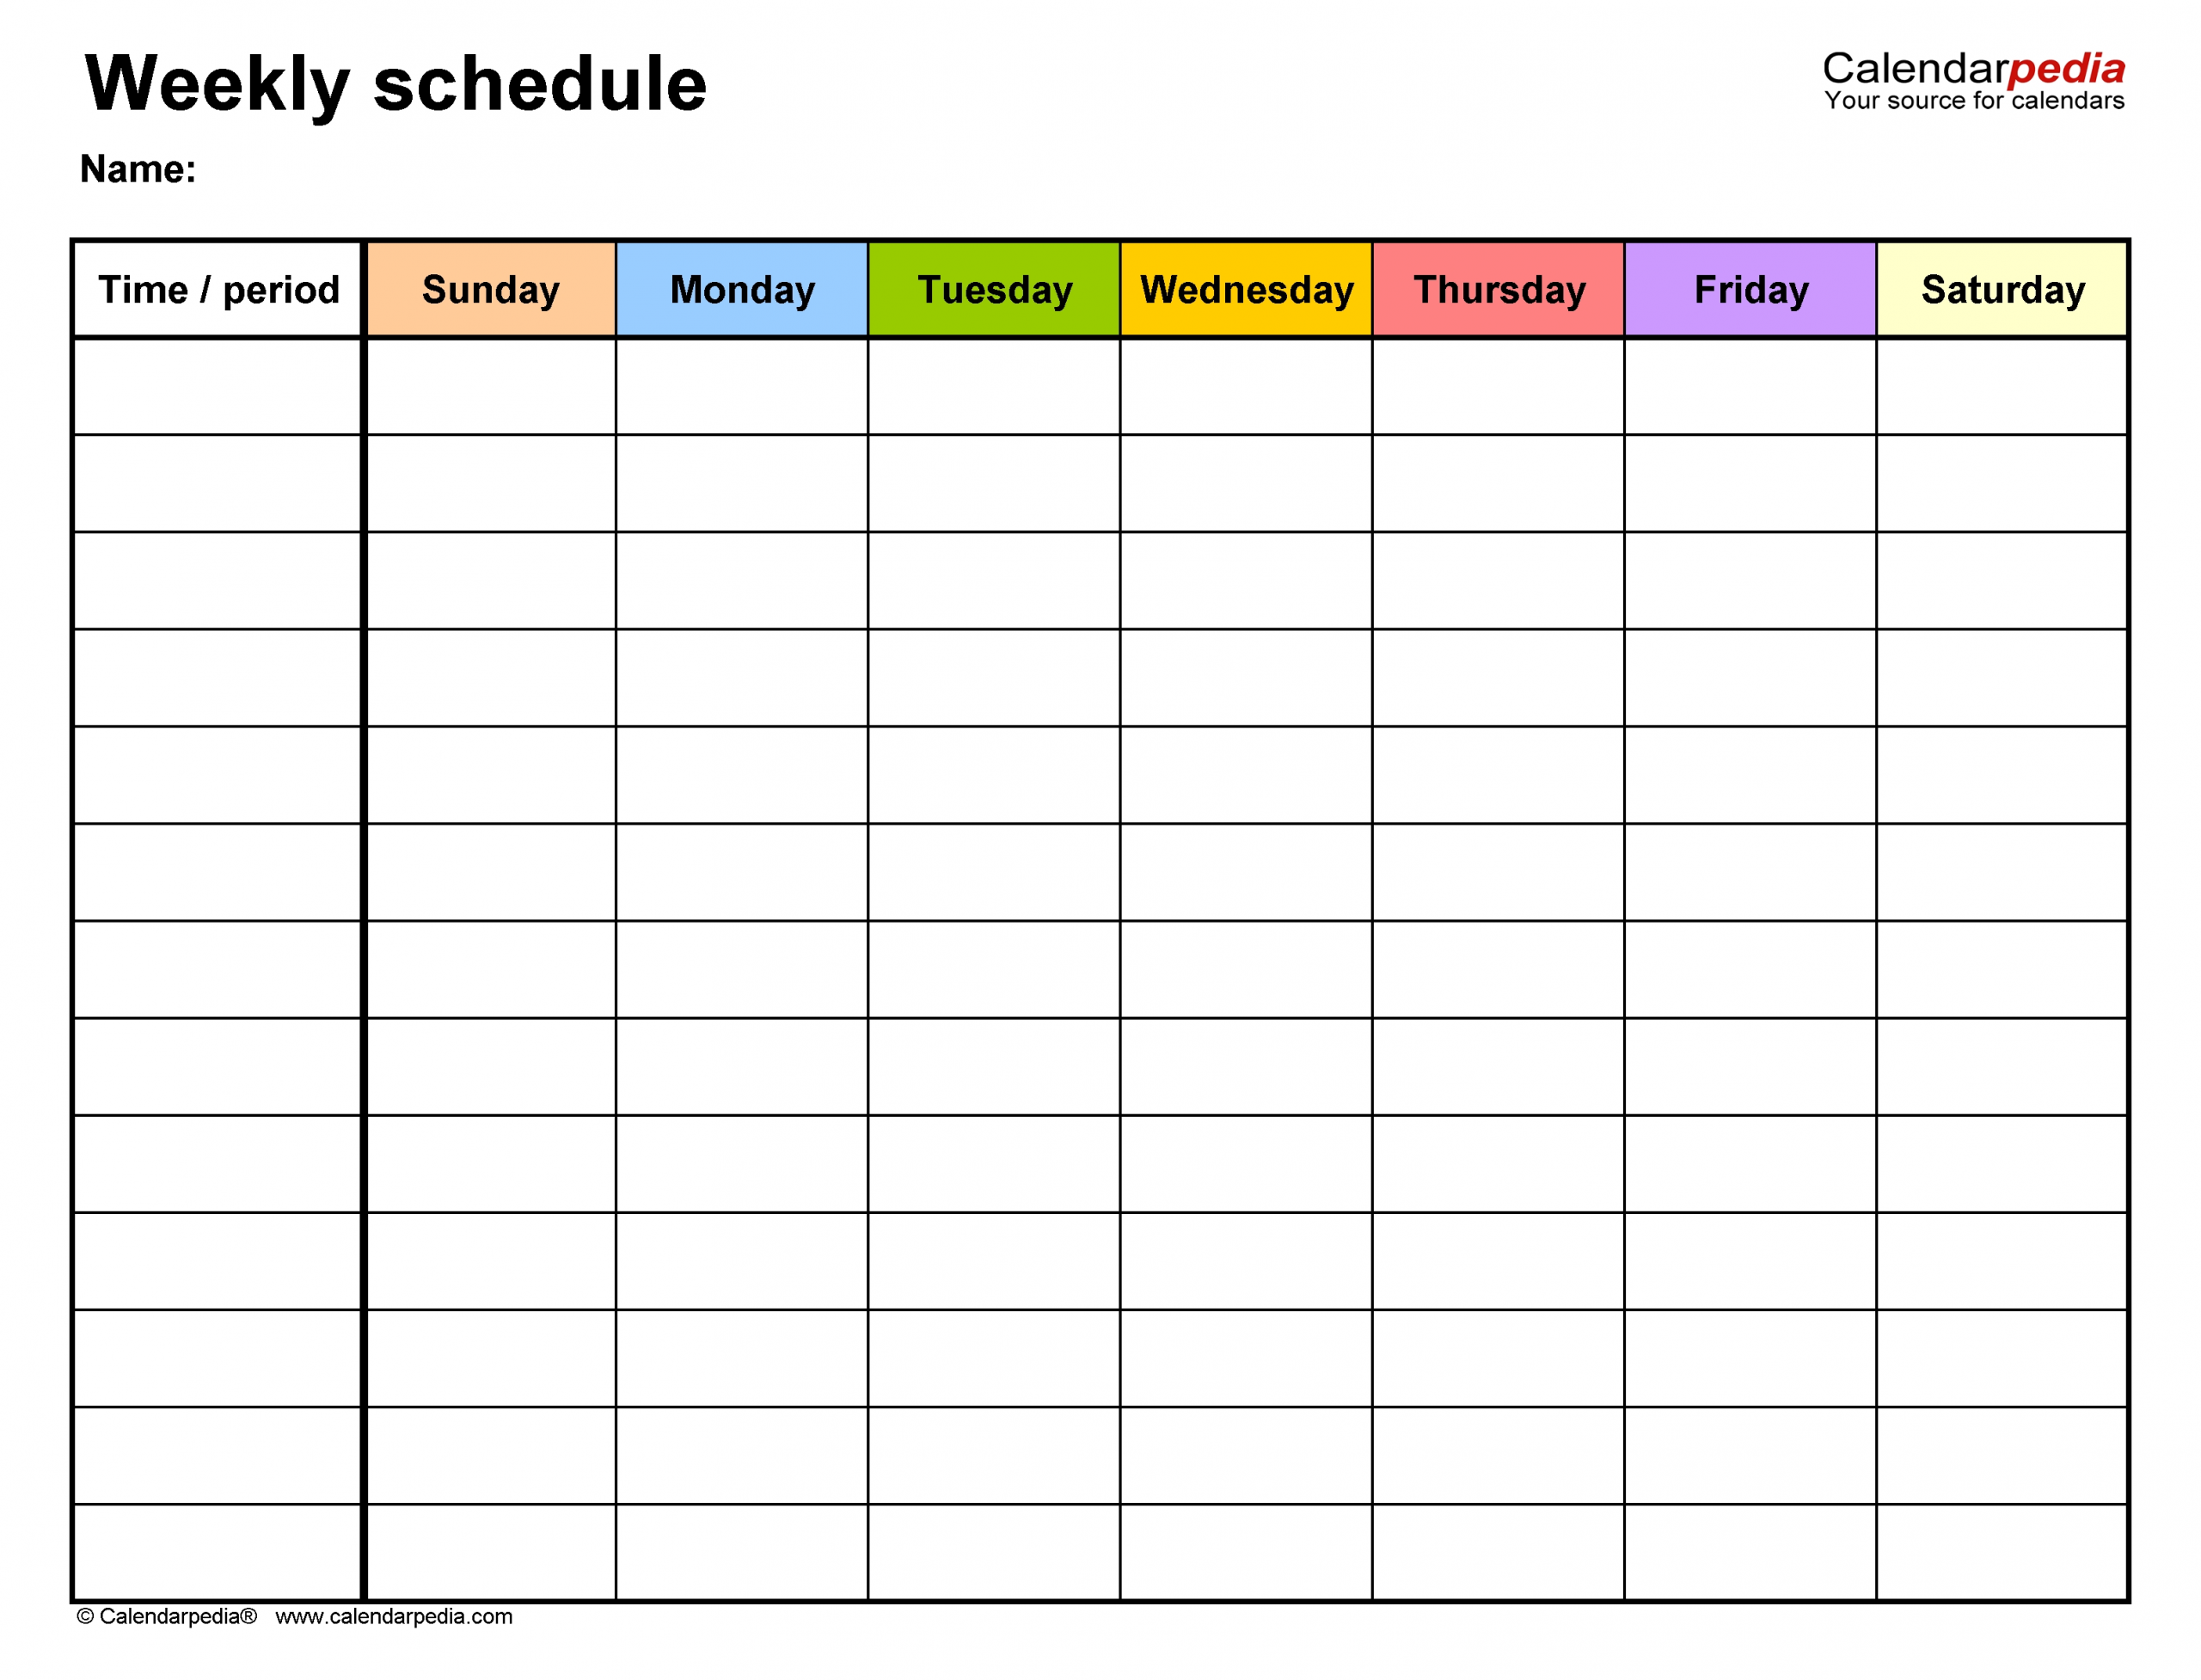 Get Schedule For 4 People 6 Tasks Monday To Friday